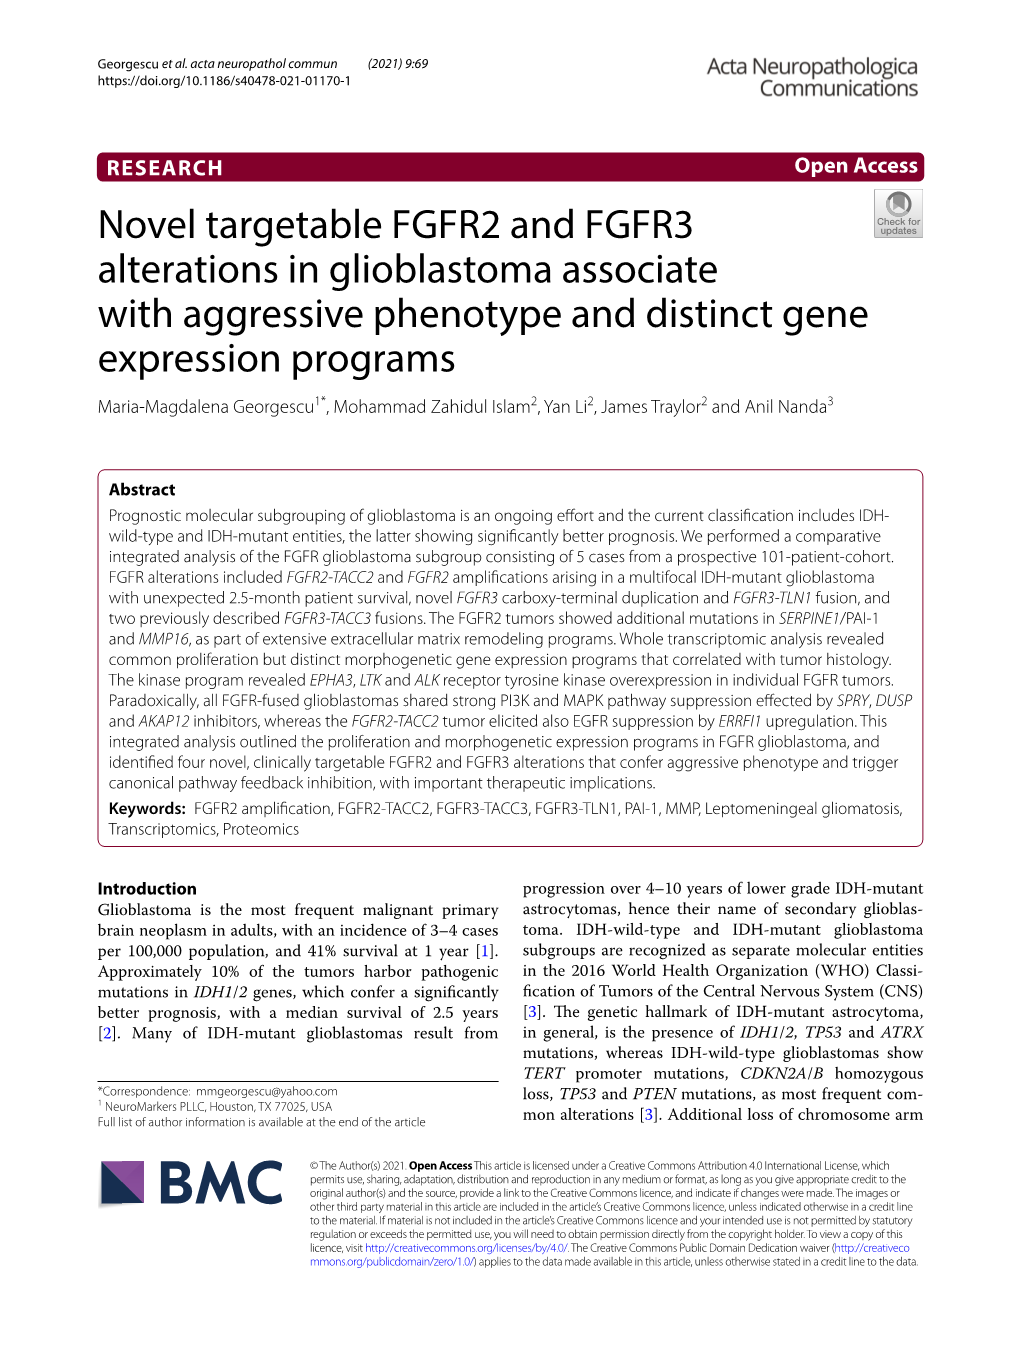 Novel Targetable FGFR2 and FGFR3 Alterations in Glioblastoma